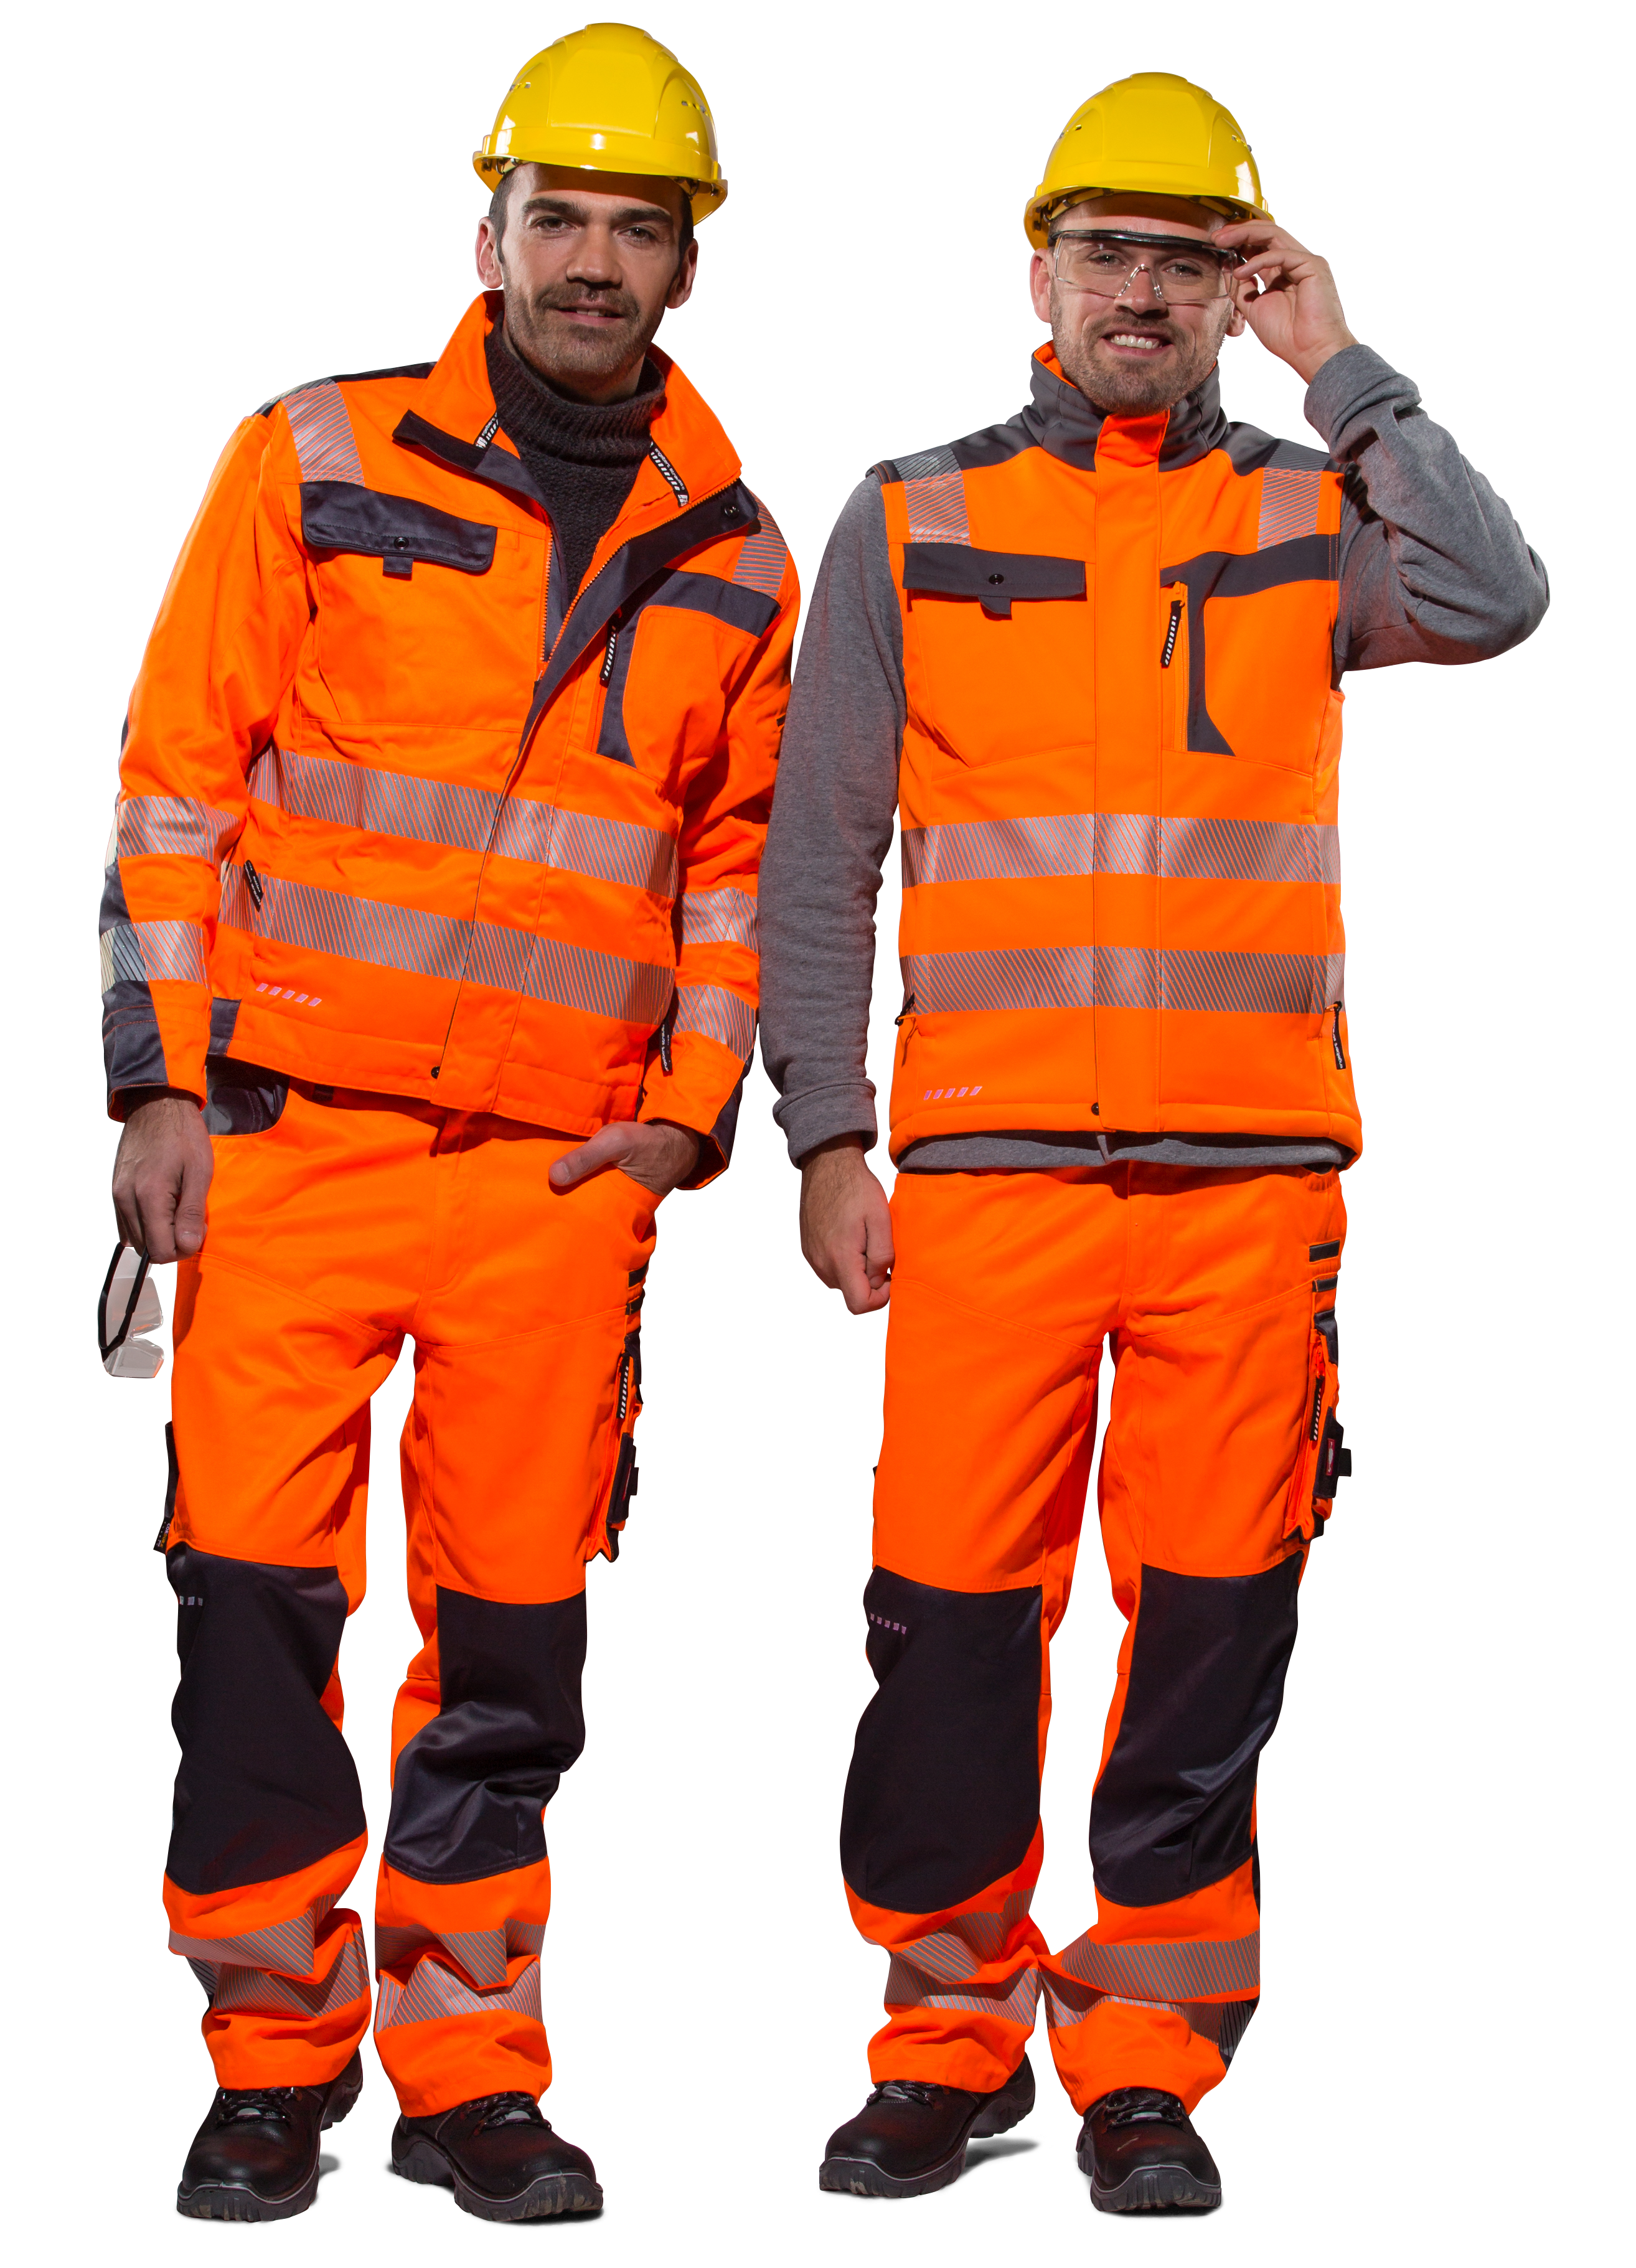 Personal Protective Equipment For Safety in Construction Sites